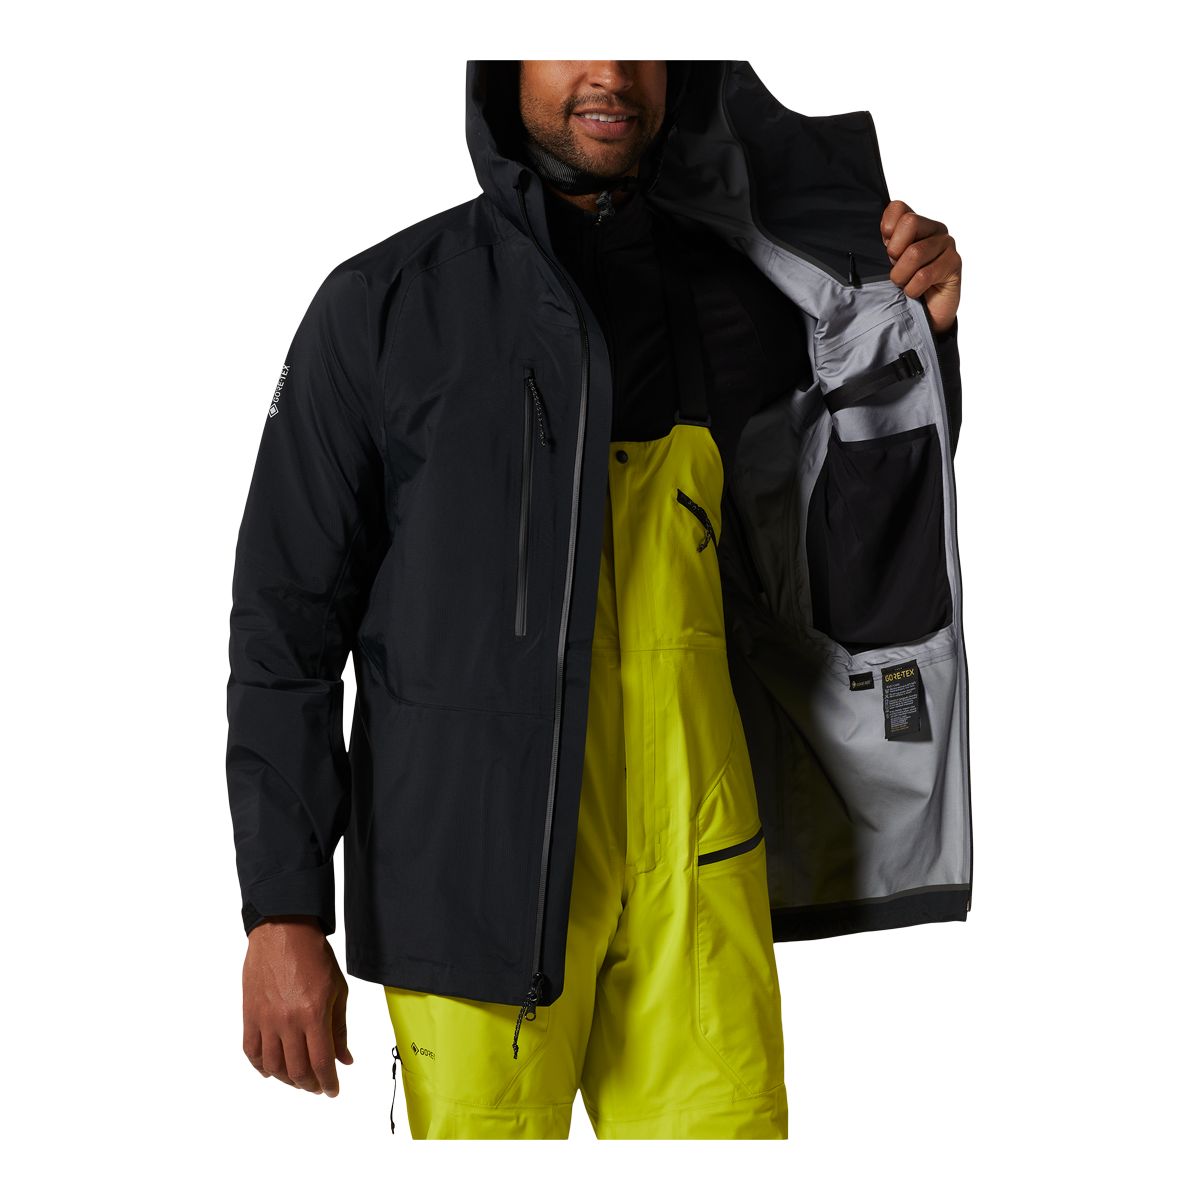 https://media-www.atmosphere.ca/product/div-03-softgoods/dpt-76-outerwear/sdpt-01-mens/333516636/mhw-mens-high-exposure-gore-tex-jacket-f21-black-0a79b9ba-f16c-4953-986f-939a7ea4ed0c-jpgrendition.jpg?imdensity=1&imwidth=1244&impolicy=mZoom